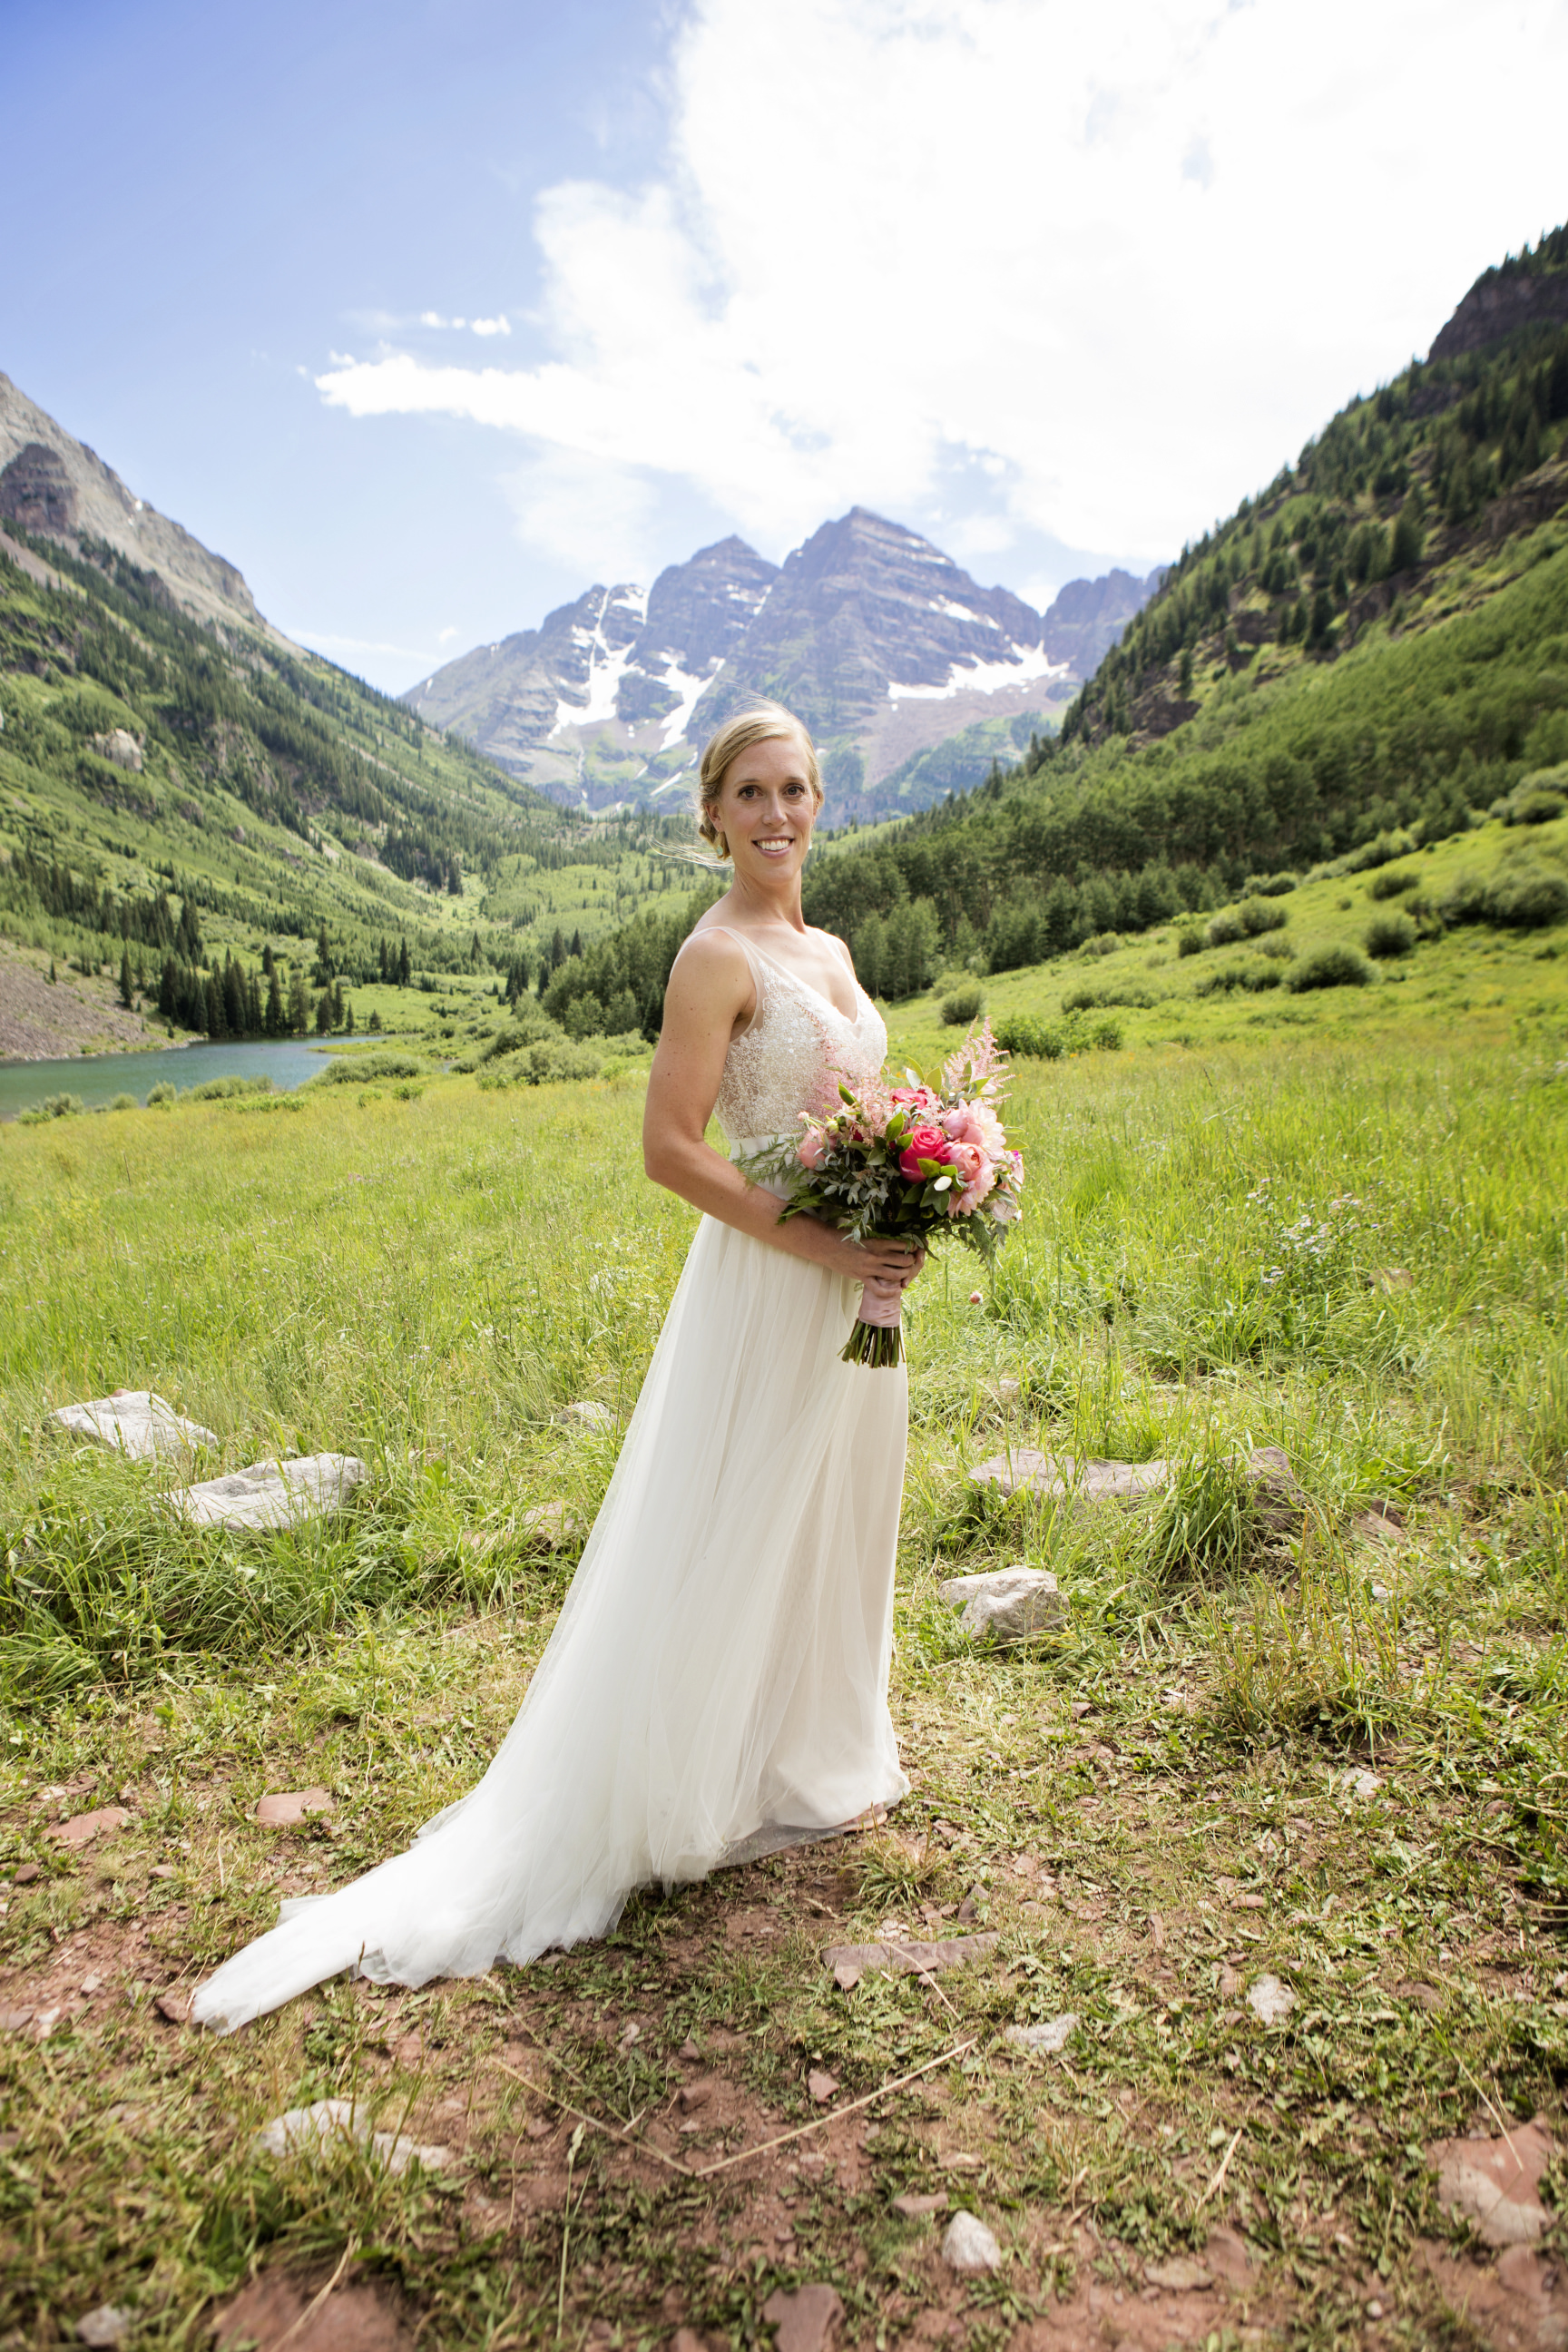 Wedding Photographers in Aspen | Windfirm Photography